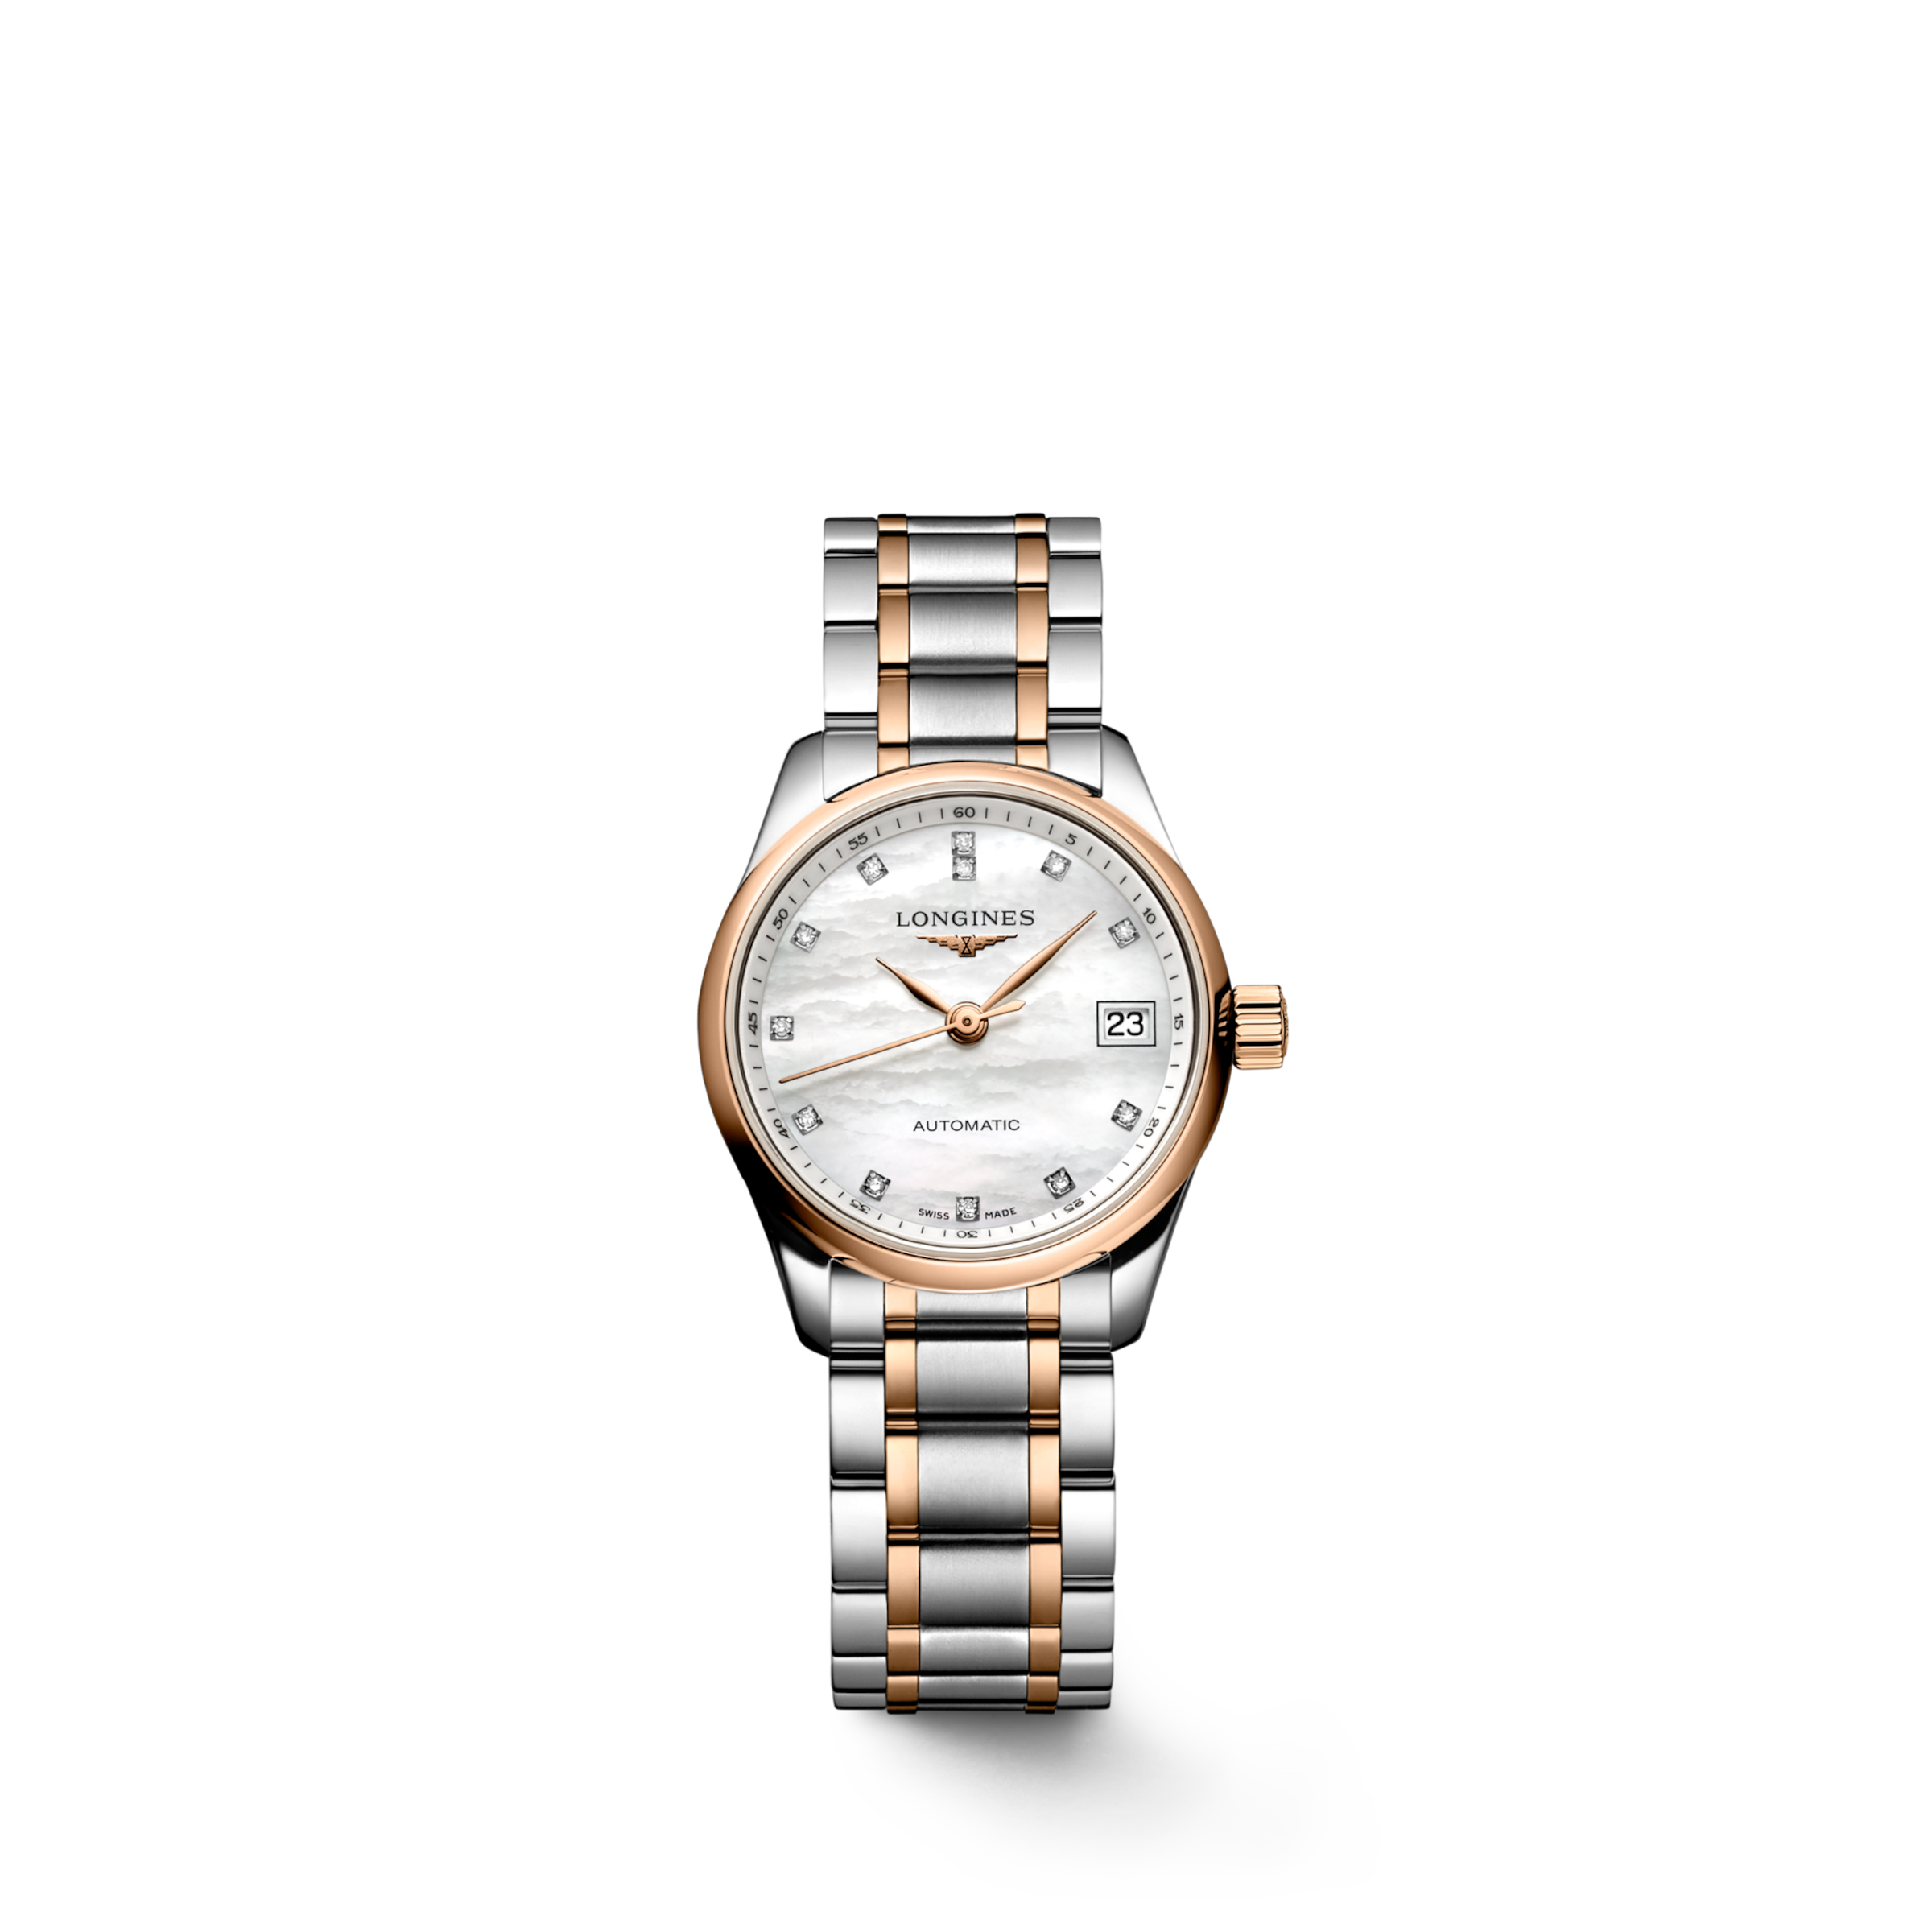 Longines MASTER COLLECTION Automatic Stainless steel and 18 karat pink gold Watch - L2.128.5.89.7